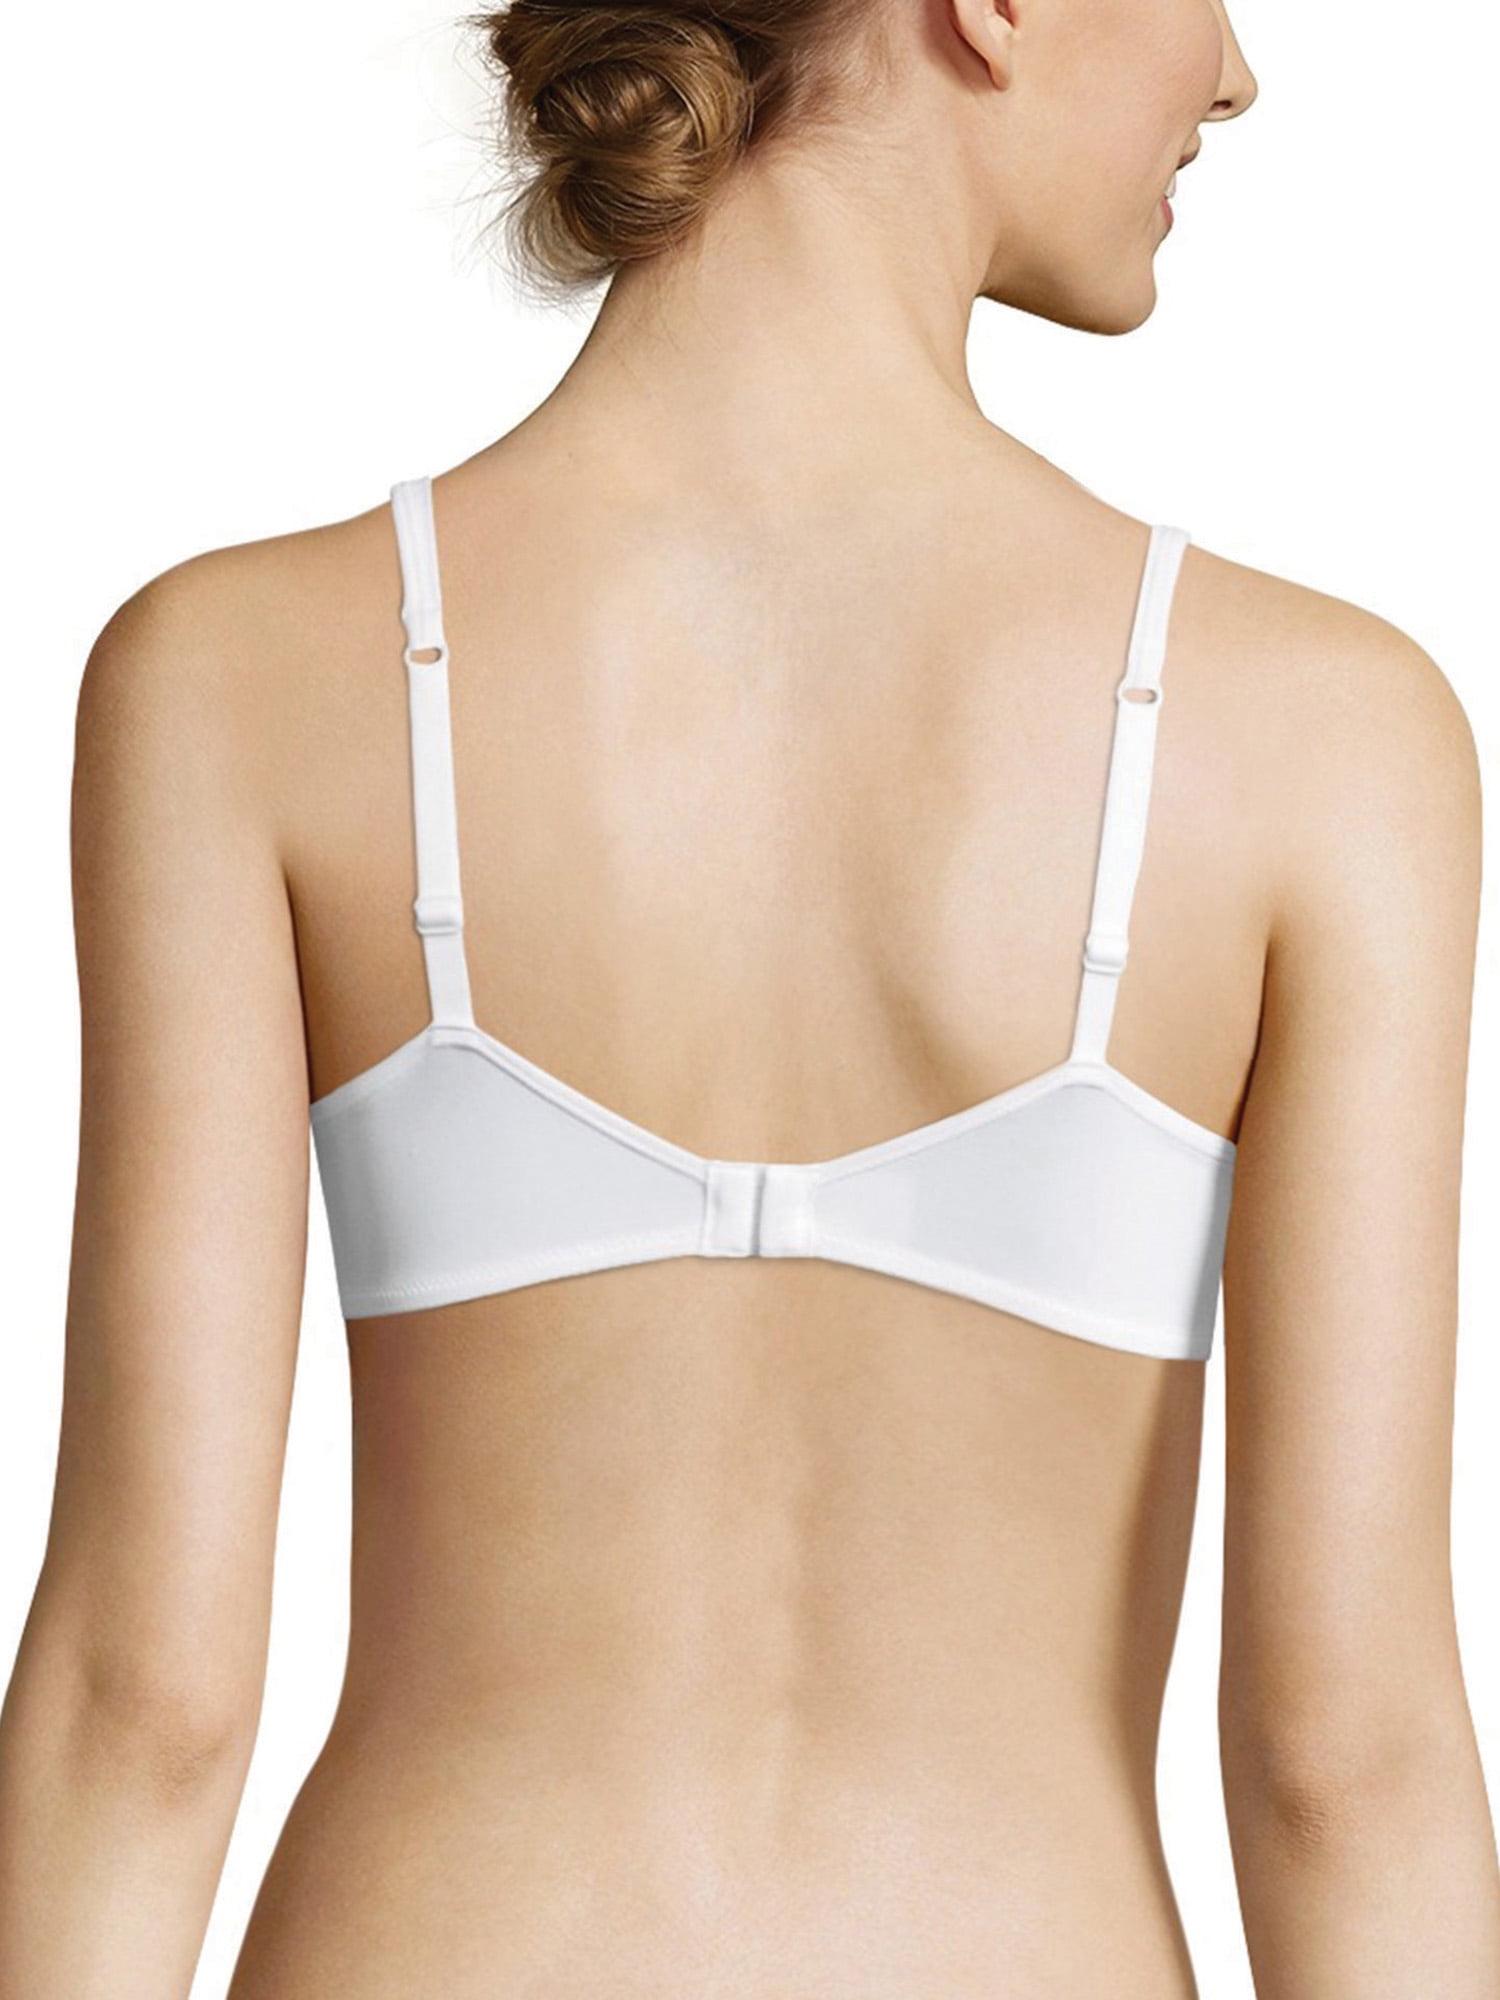 Hanes Women's Fit Perfection Underwire Bra with Lift 